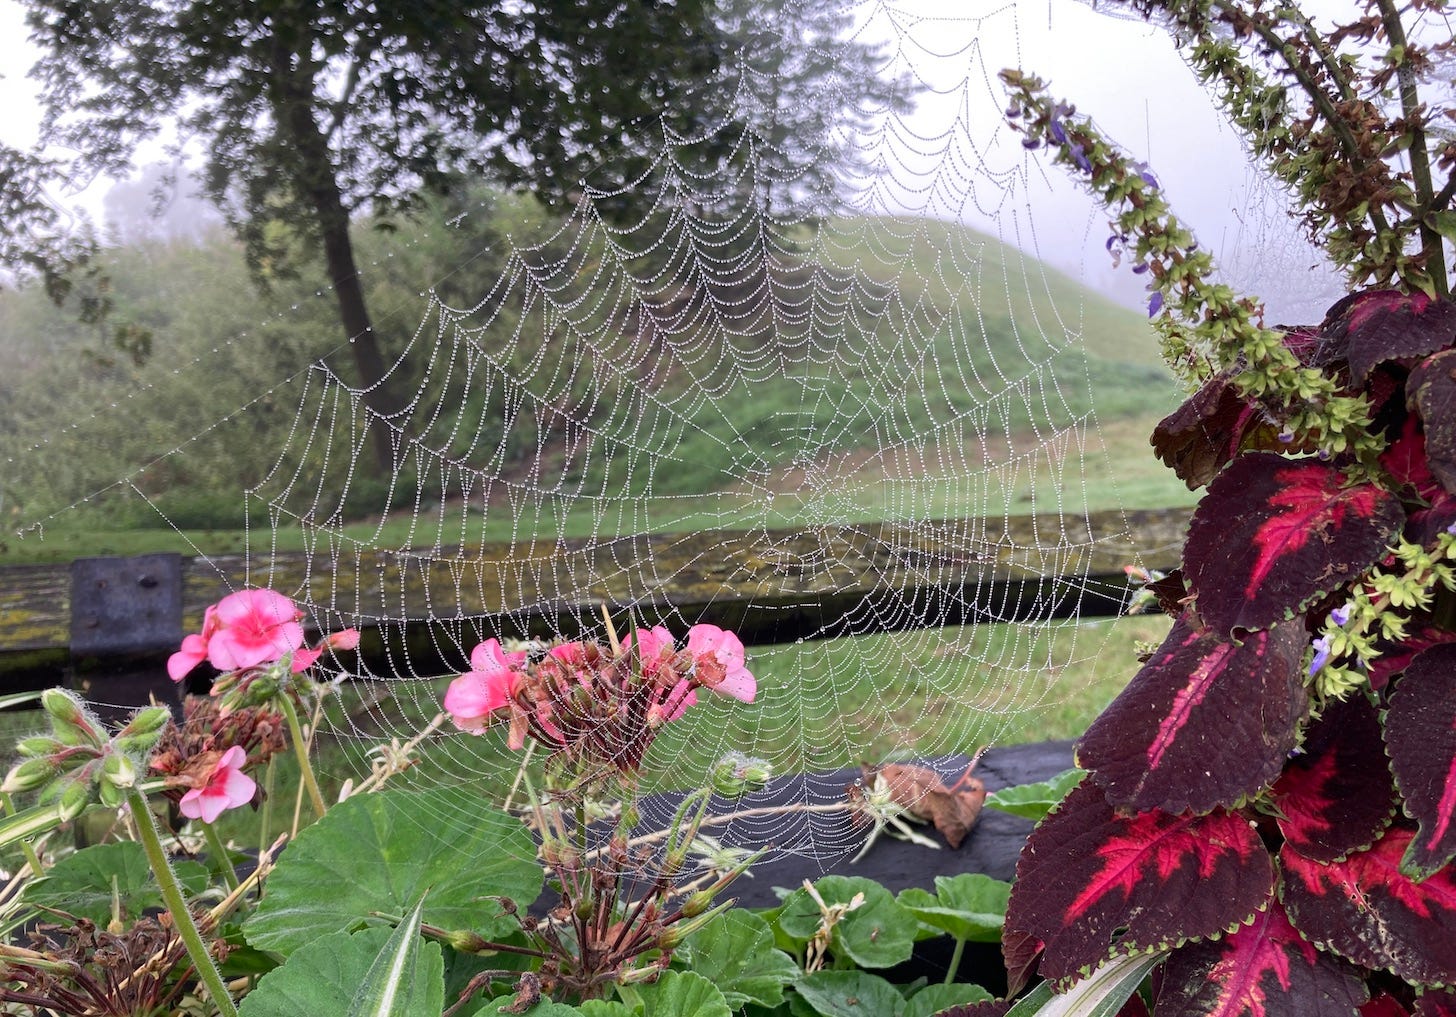 A cobweb highlighted by dew caught between summer bedding plants at the end of the season.